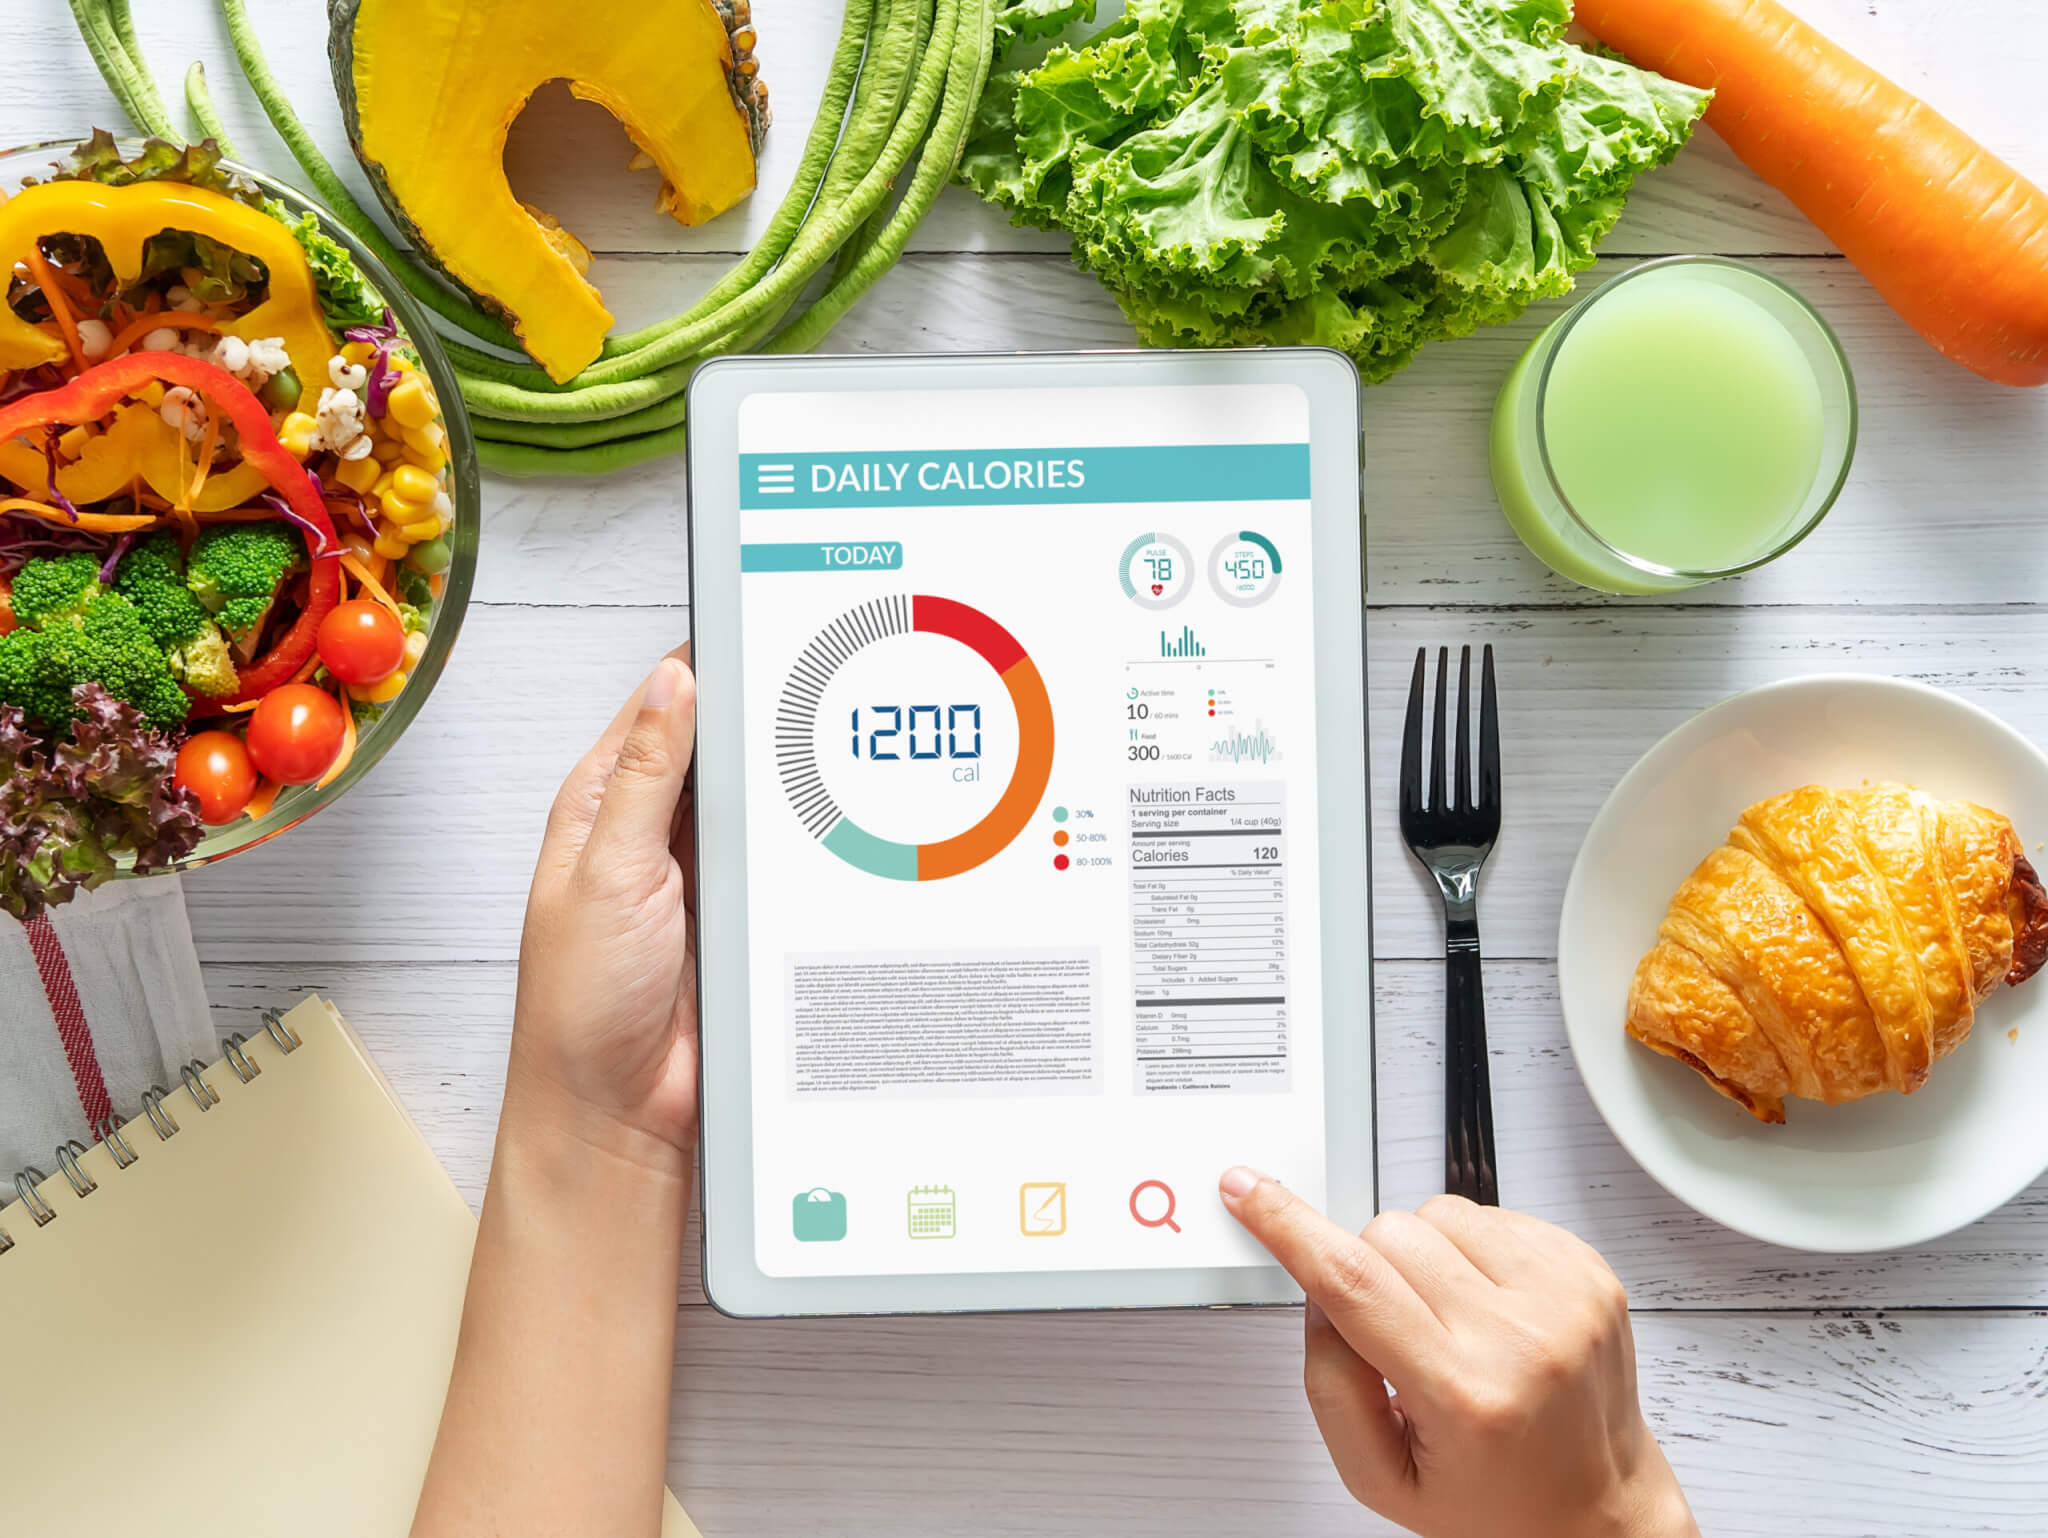 Best Apps For Calorie Counting: Top 5 Nutrition Trackers, According To  Experts - Study Finds